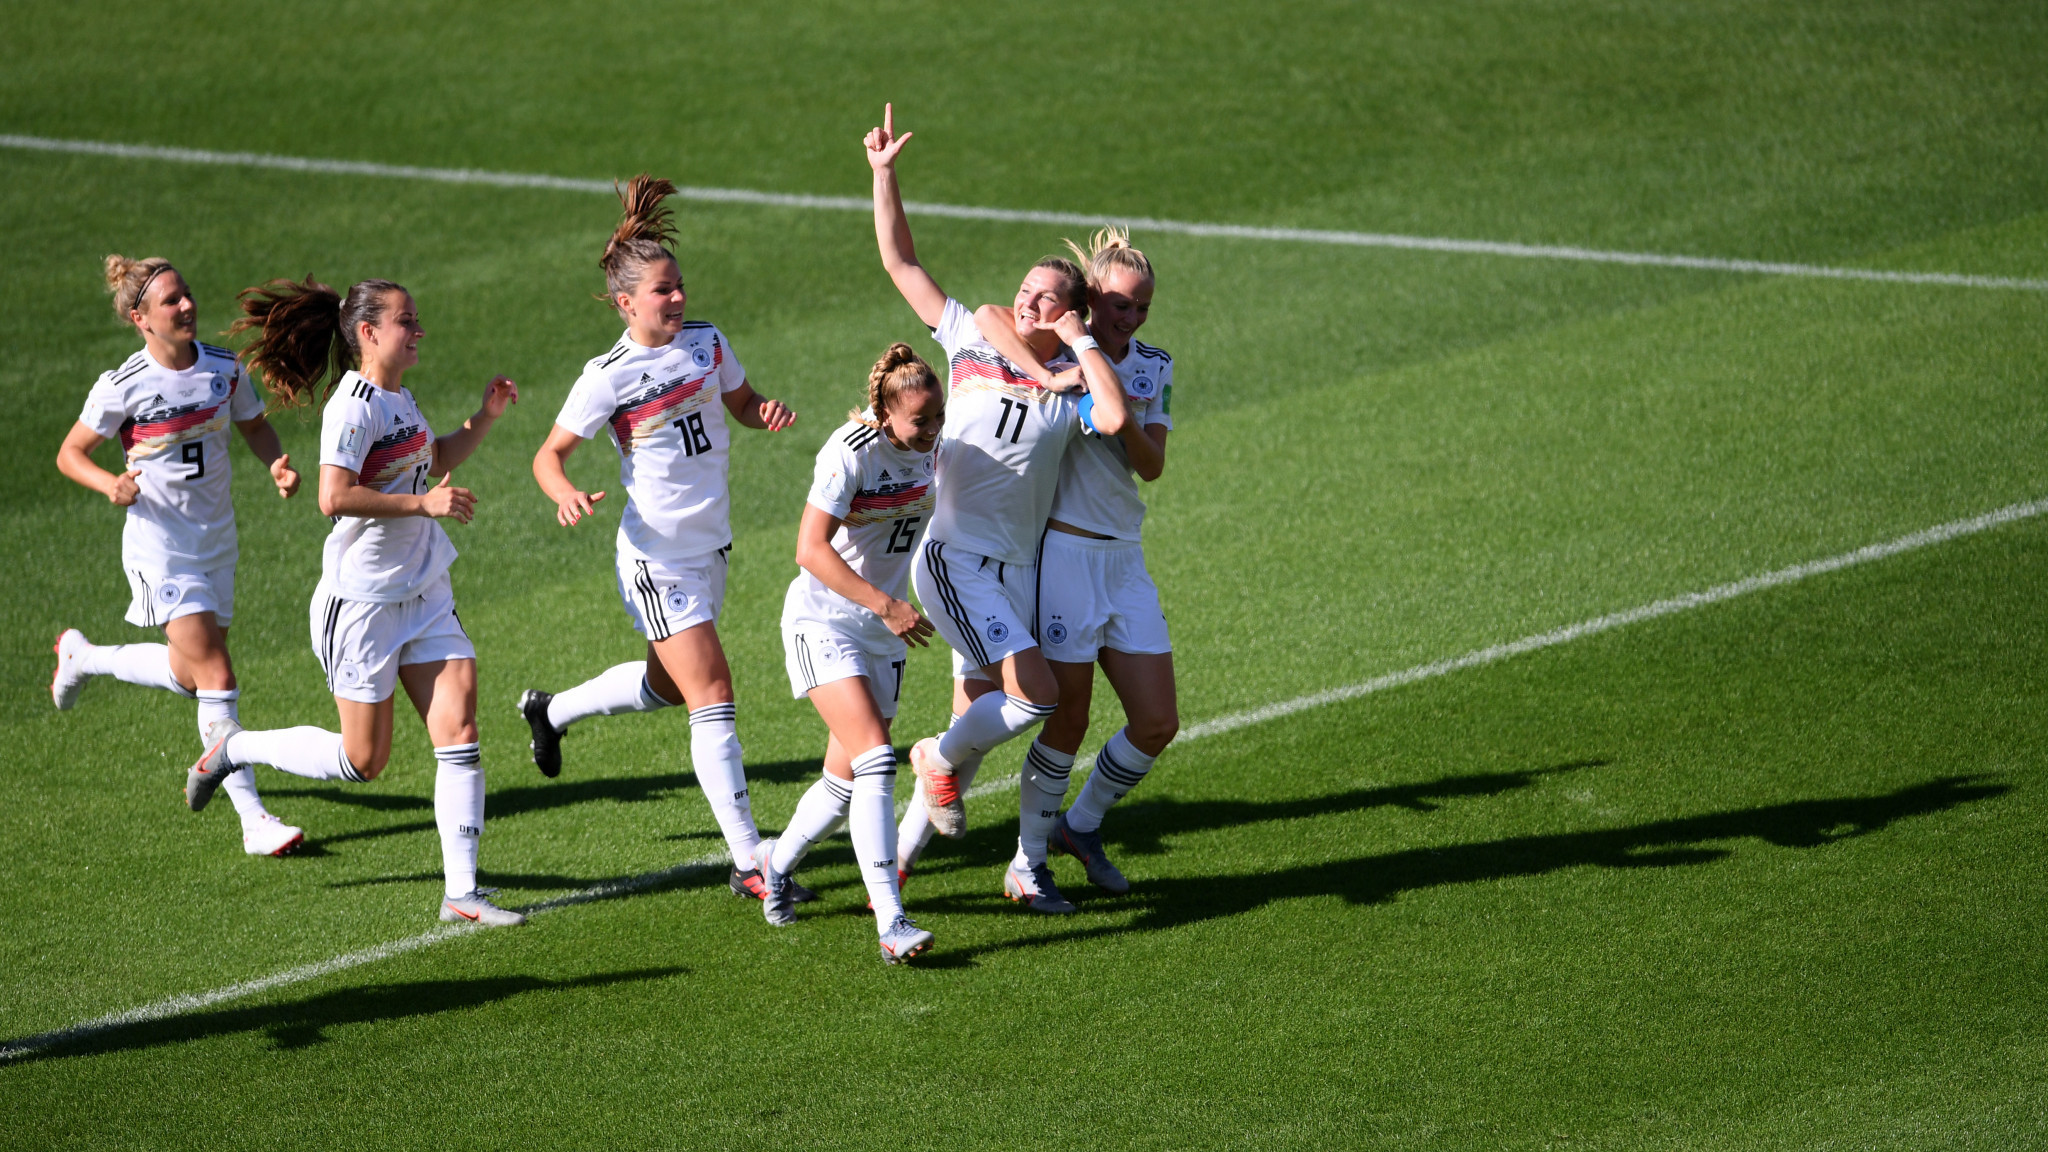 Popp is mobbed by her team mates after her header opened the scoring in Grenoble ©Getty Images